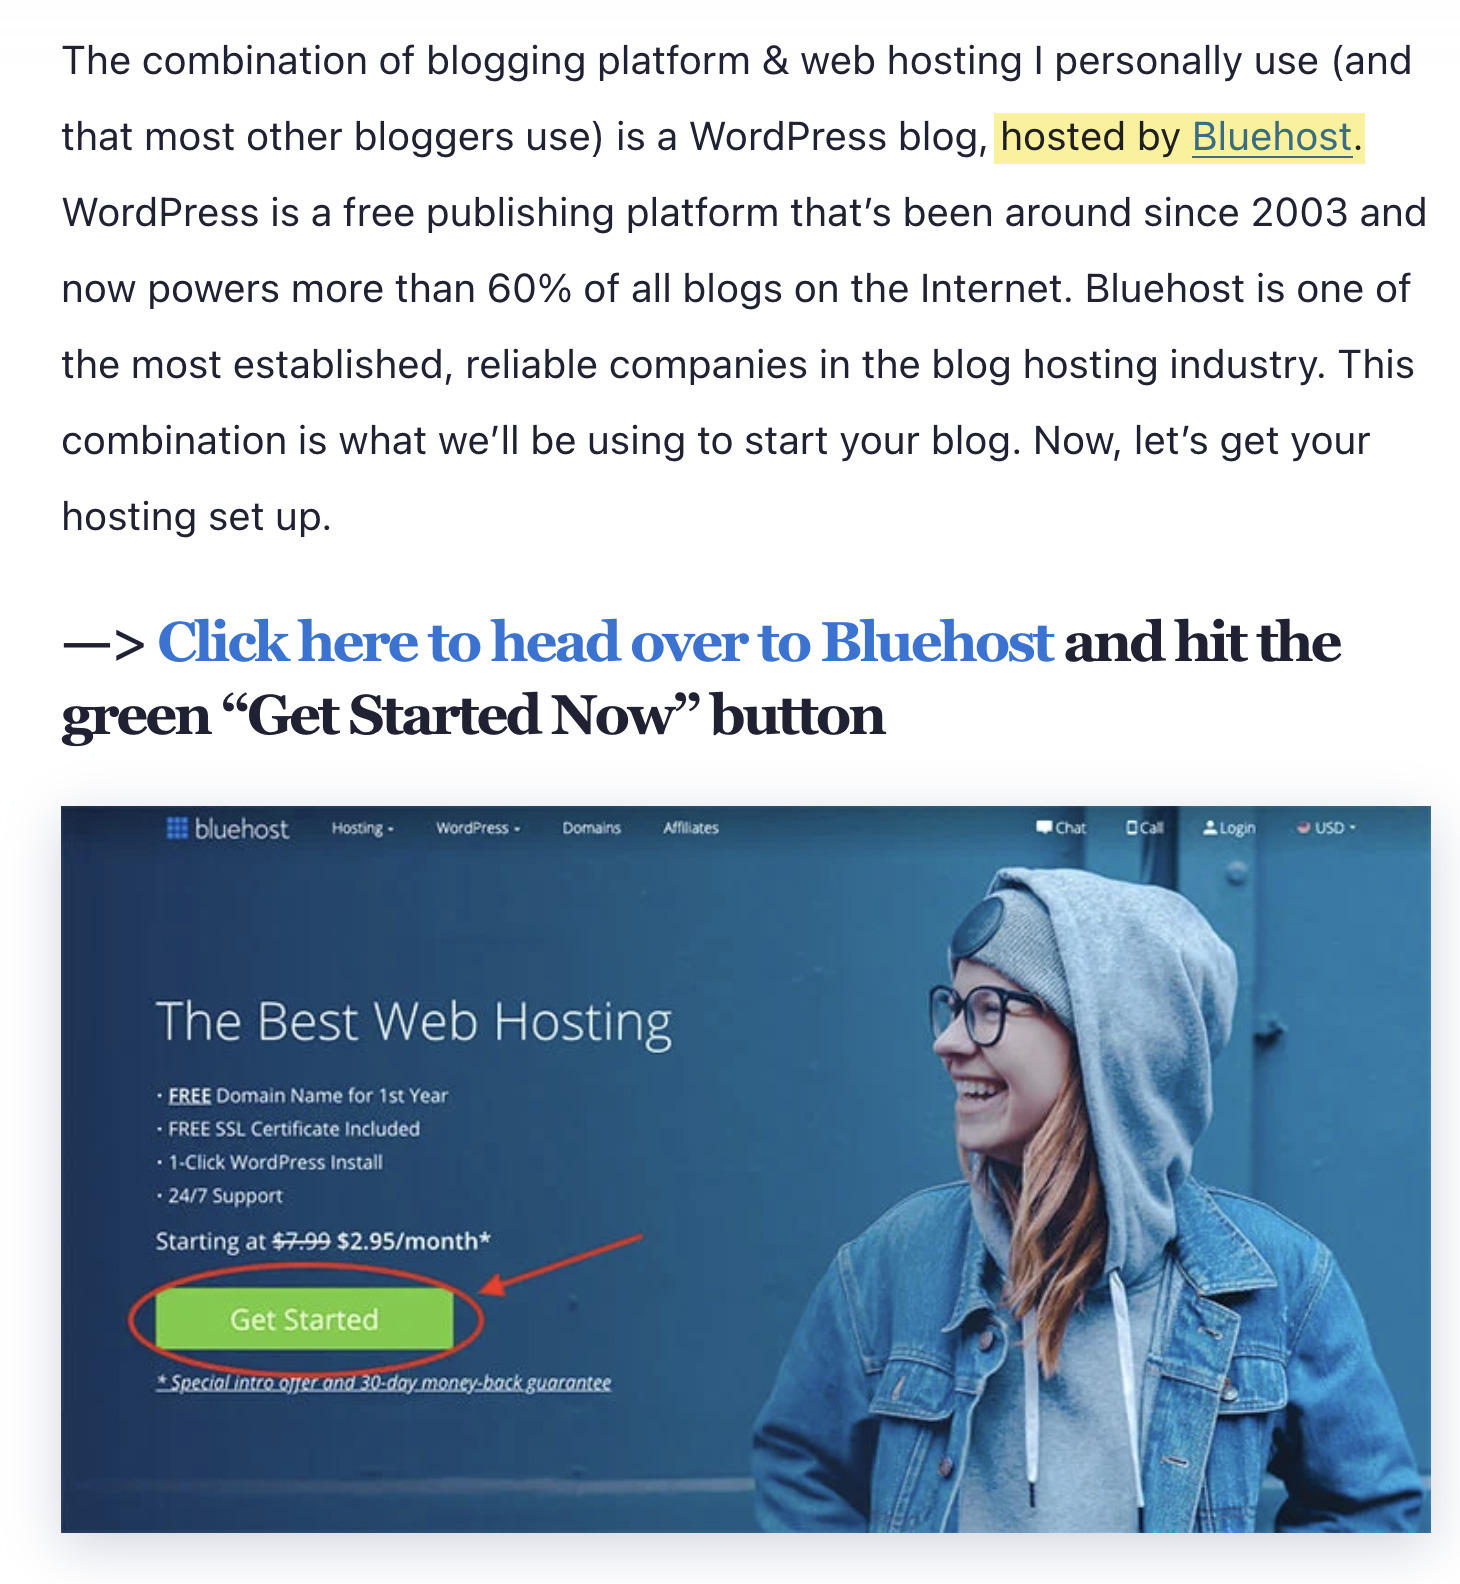 CTA asking site visitors to use Bluehost, a web hosting service